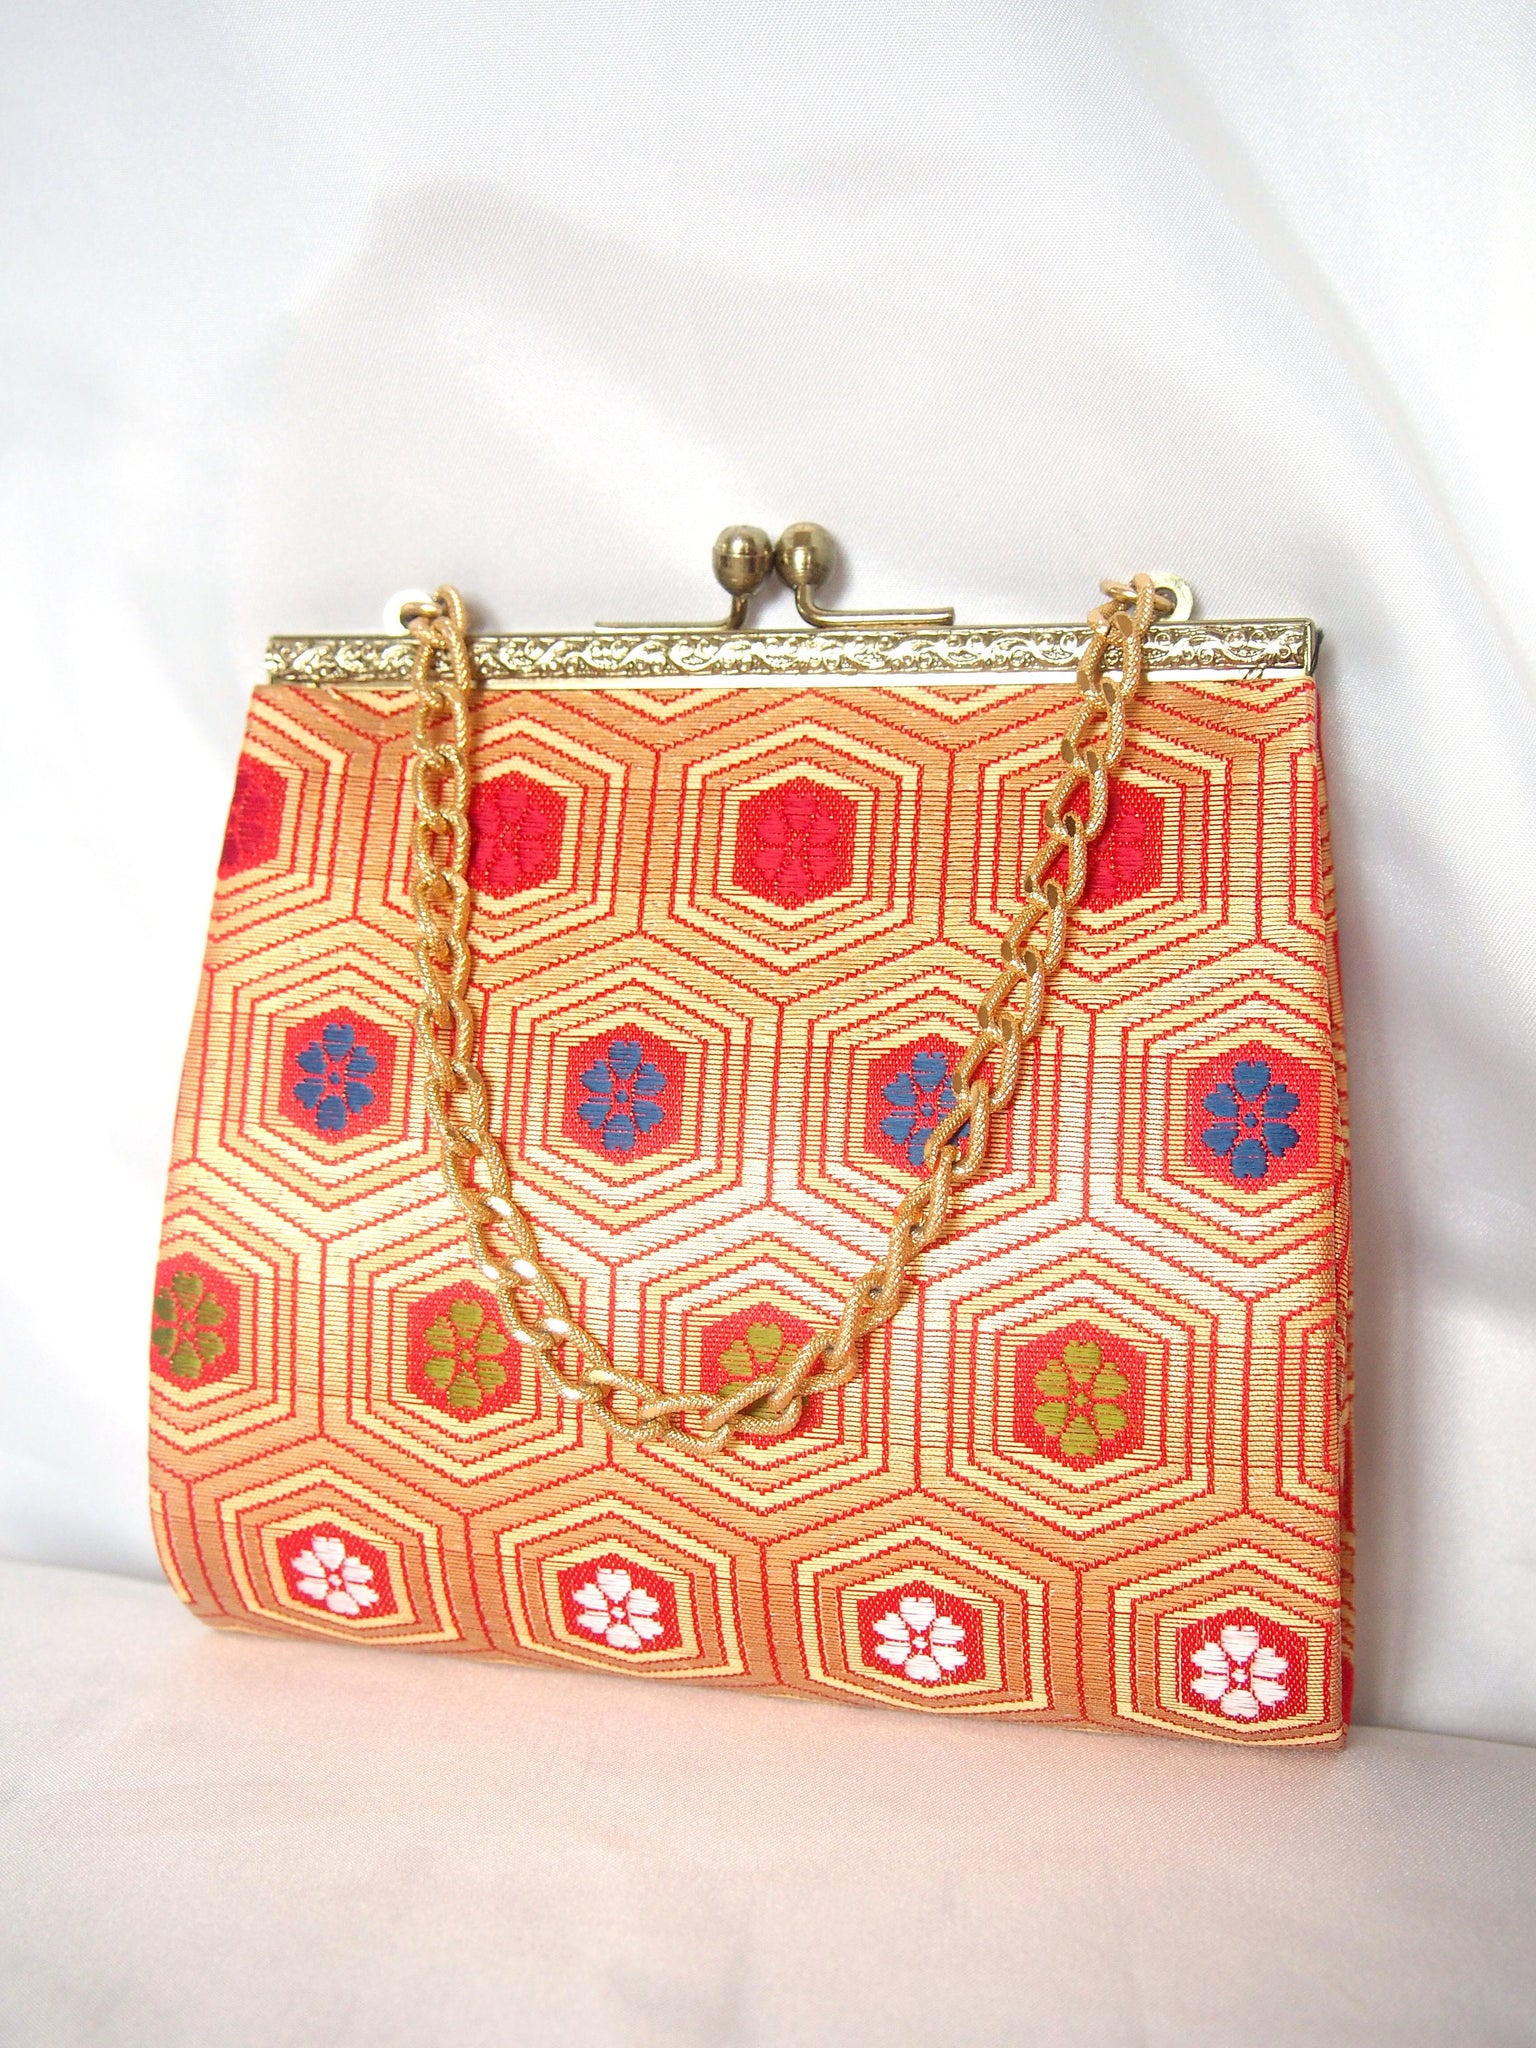 Vintage kimono handbag for children - red, orange, and gold, with colorful flowers